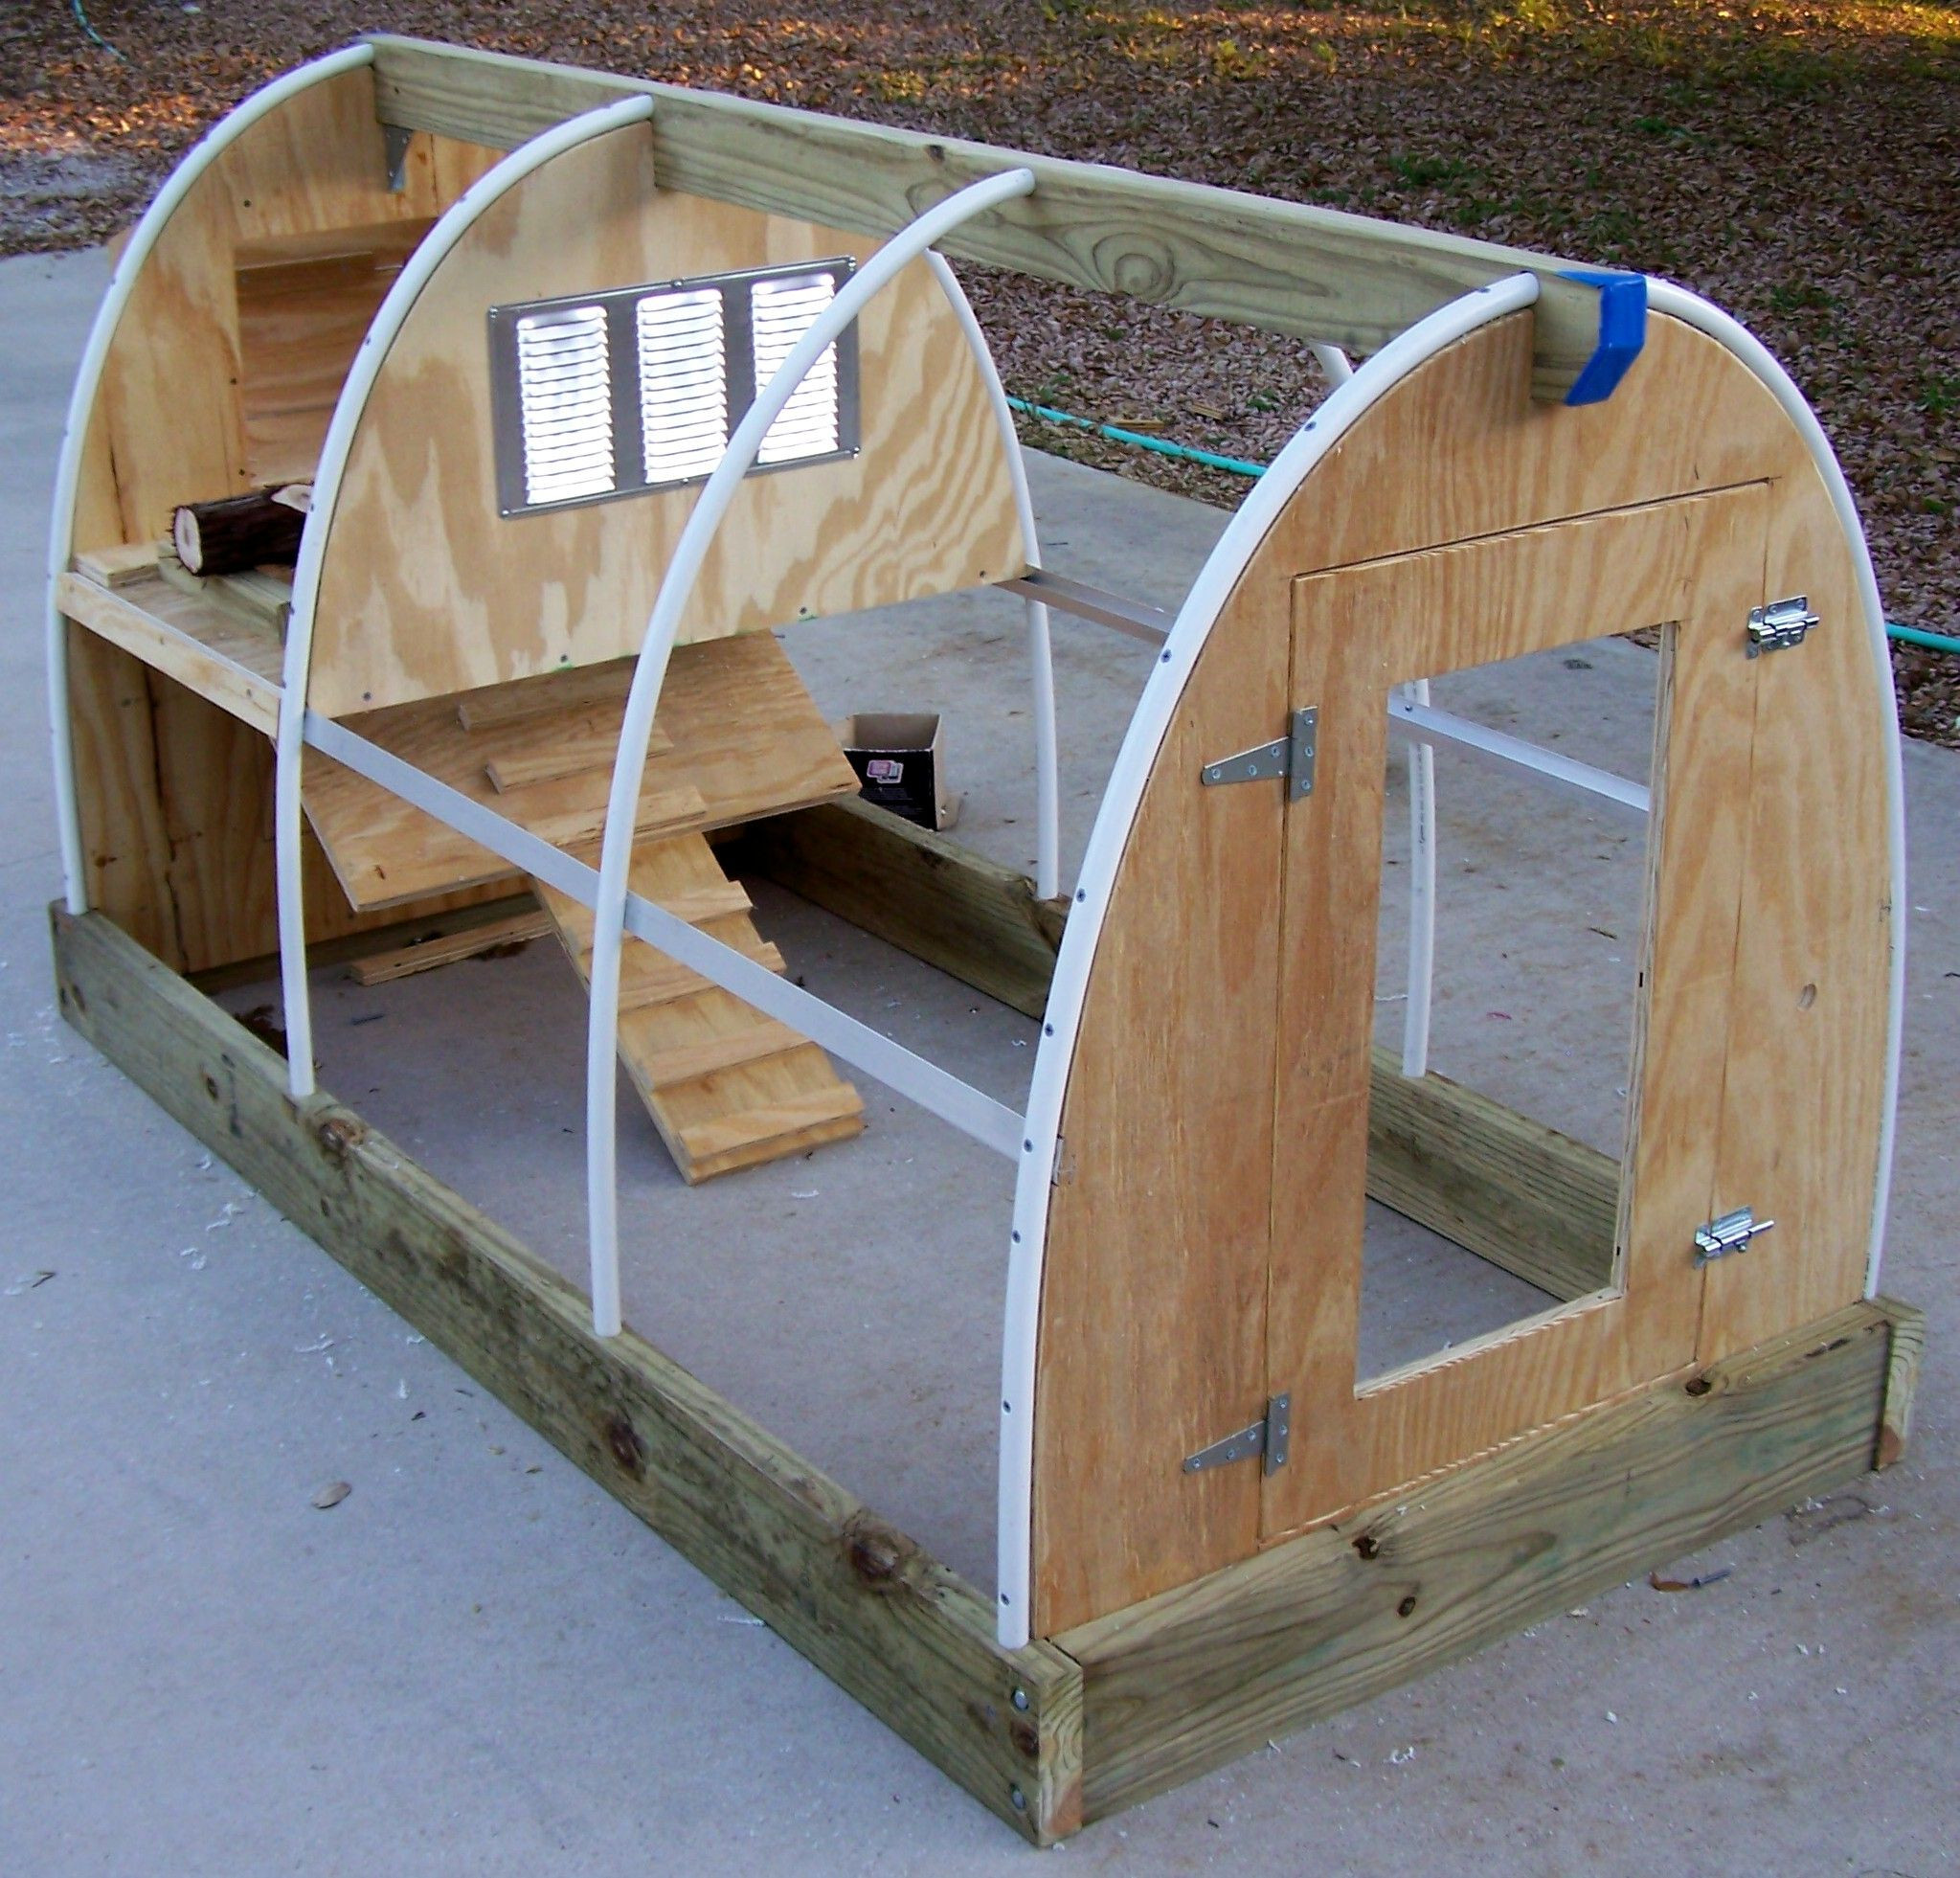 DIY Chicken Coops Plans Free
 DIY Chicken Coops Plans That Are Easy To Build